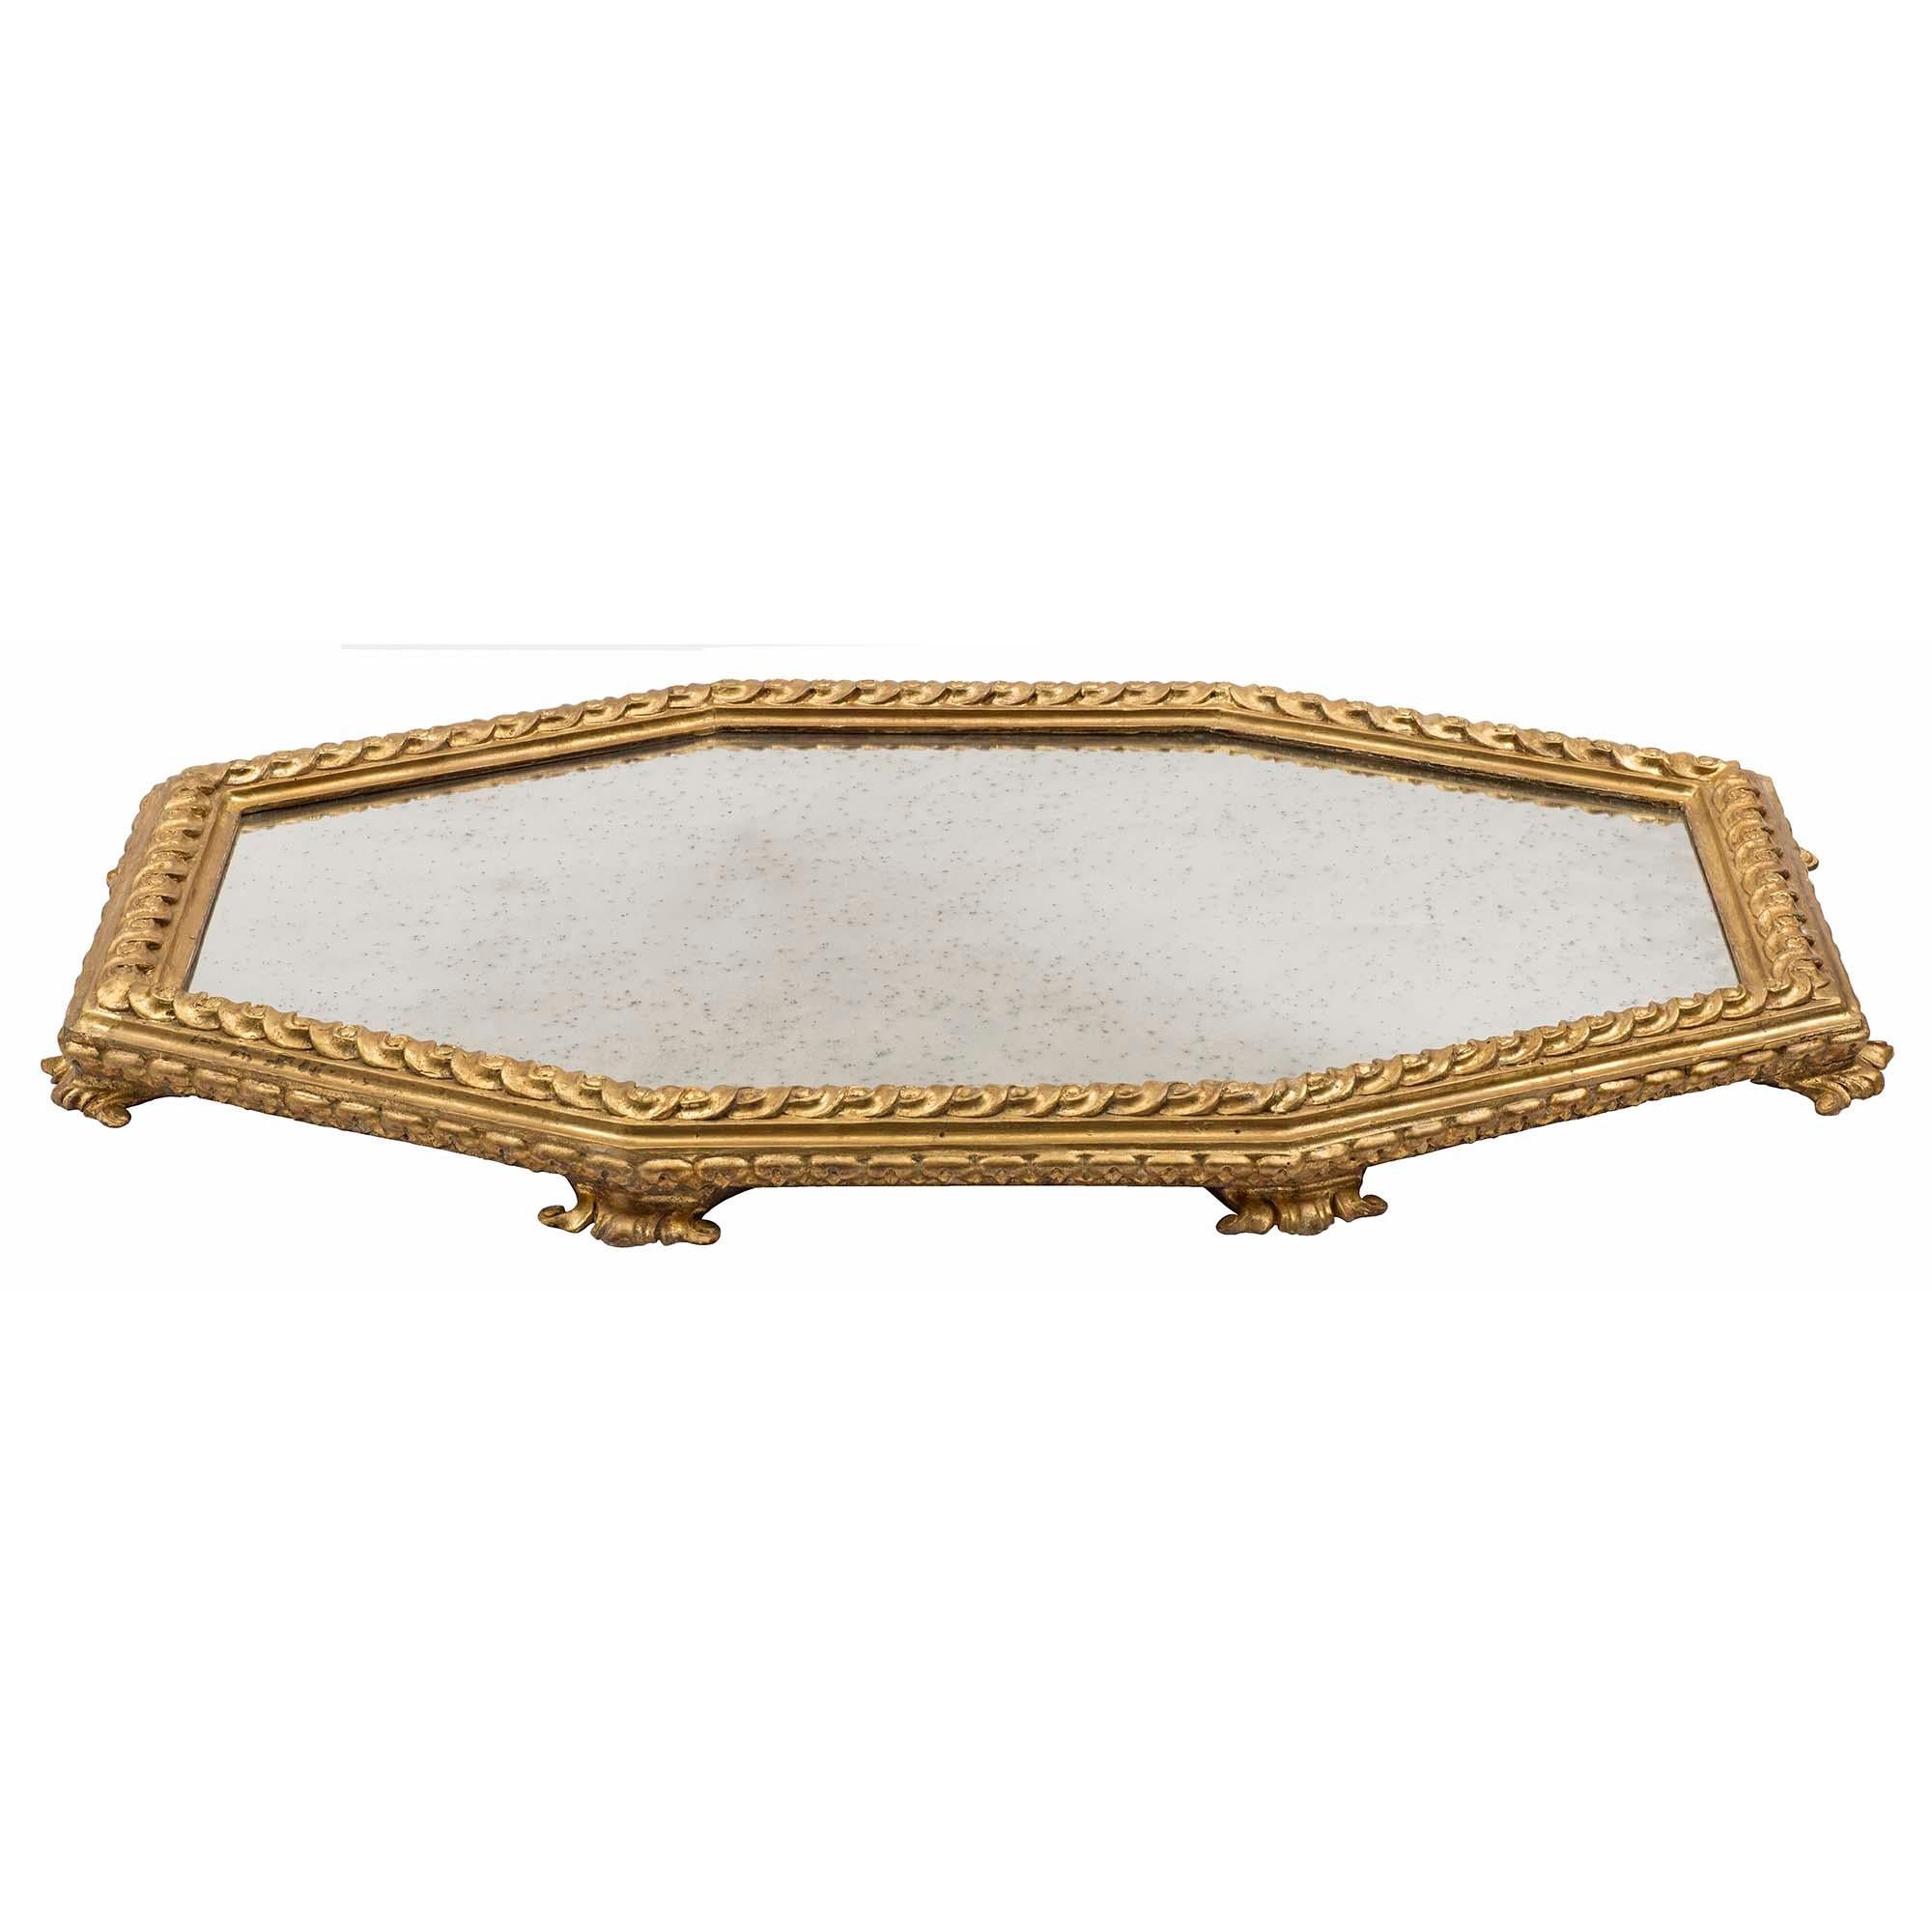 A very handsome Italian 18th century Louis XVI period giltwood centerpiece. The elongated octagonal shaped surtout de table is raised by eight most decorative foliate feet below a foliate beaded band. Centering the original mirror plate is a richly